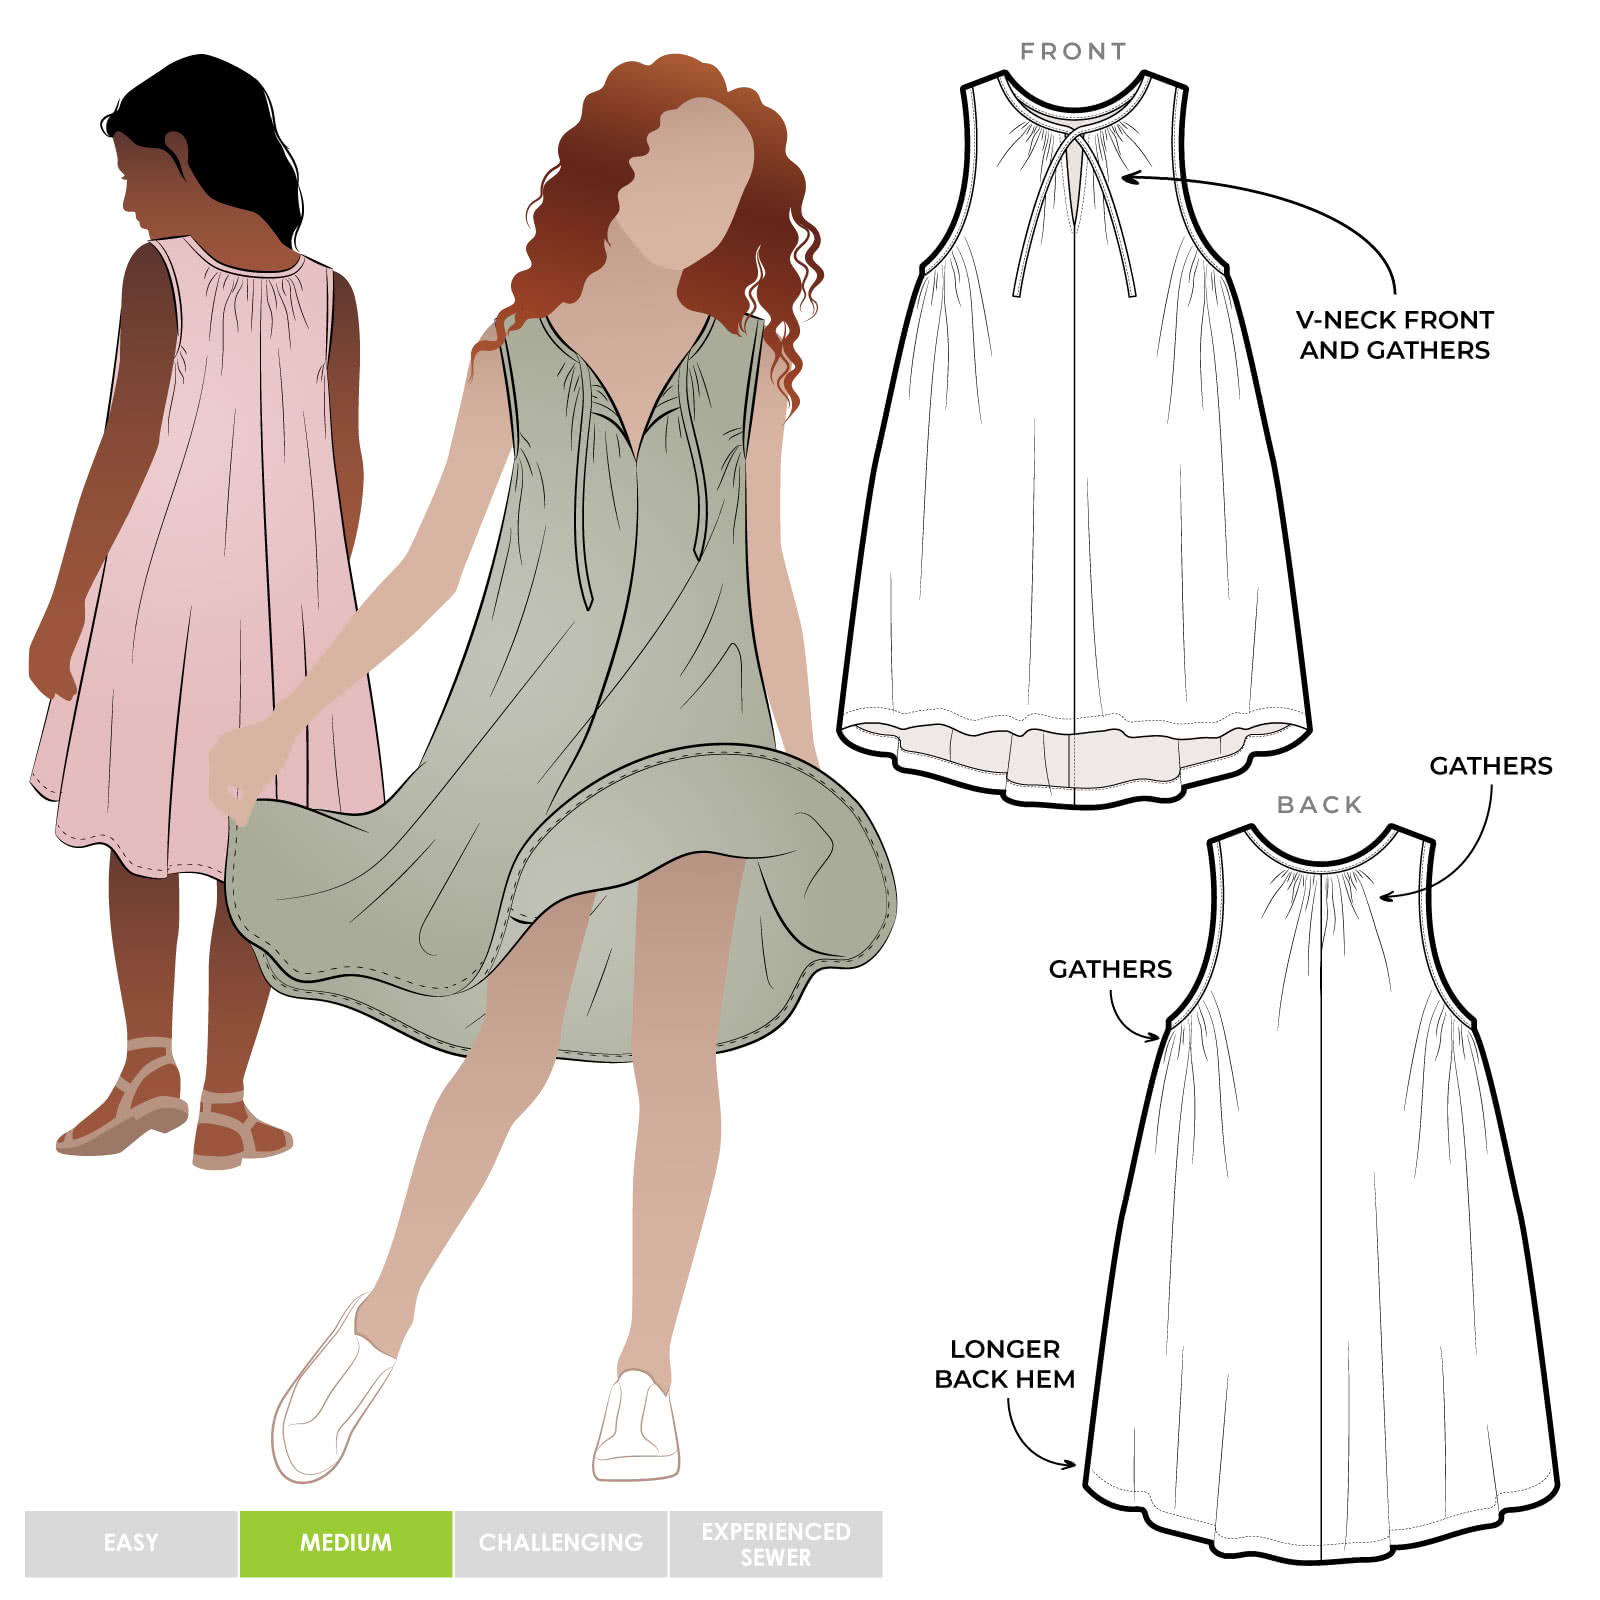 Heidi Teens Dress By Style Arc - Free flowing summer dress with deep gathered armholes and neck ties for teens 8-16